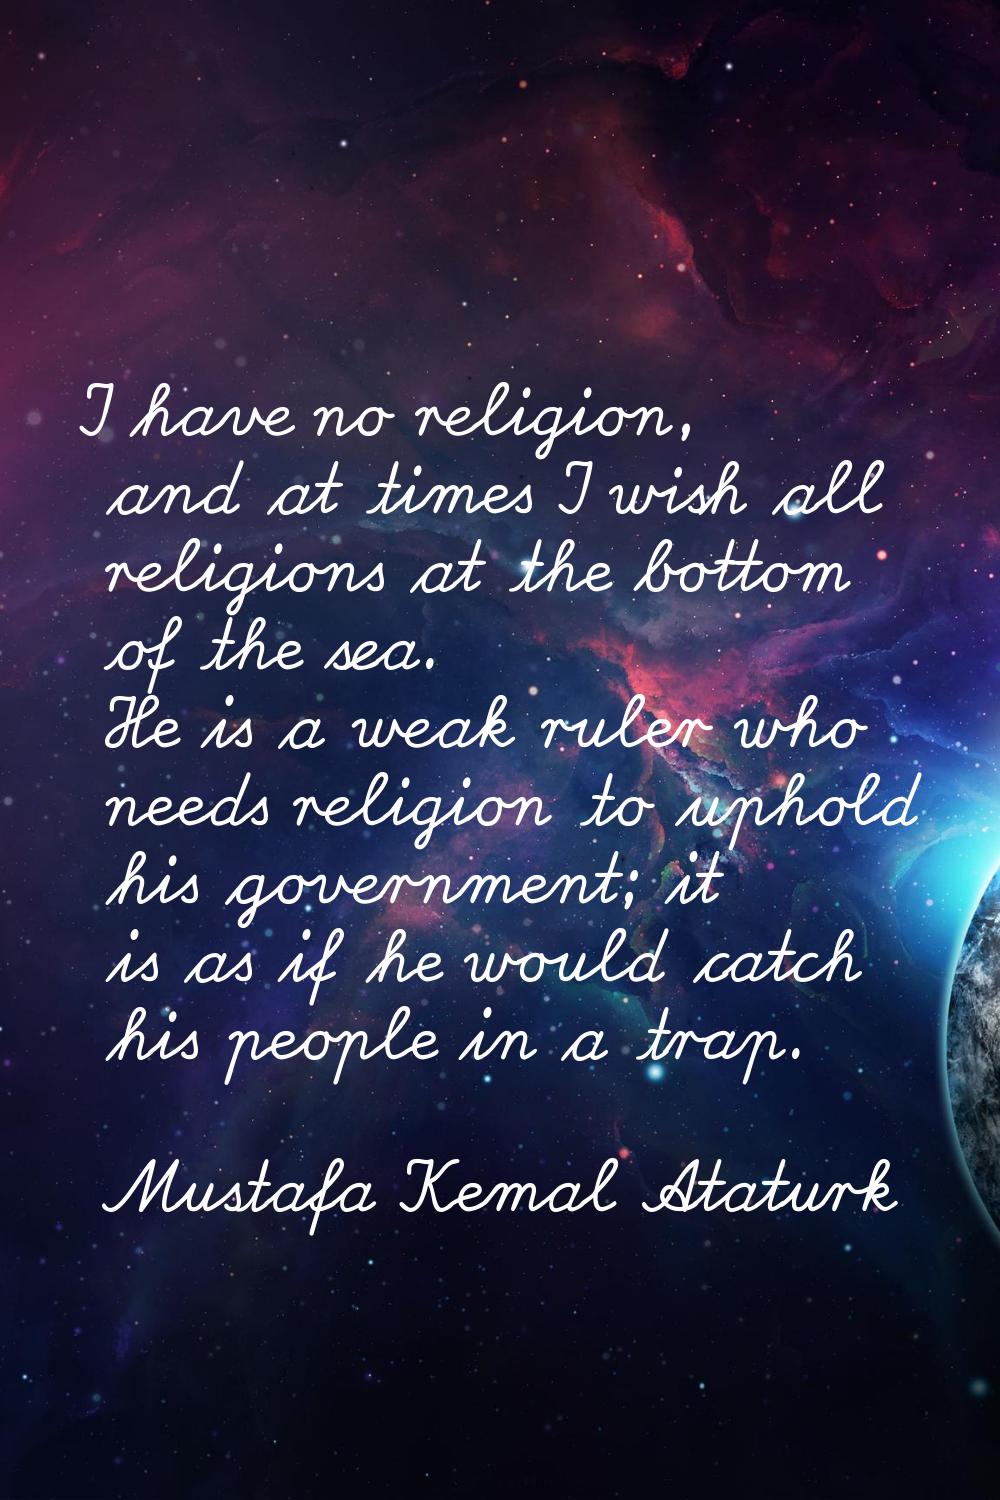 I have no religion, and at times I wish all religions at the bottom of the sea. He is a weak ruler 